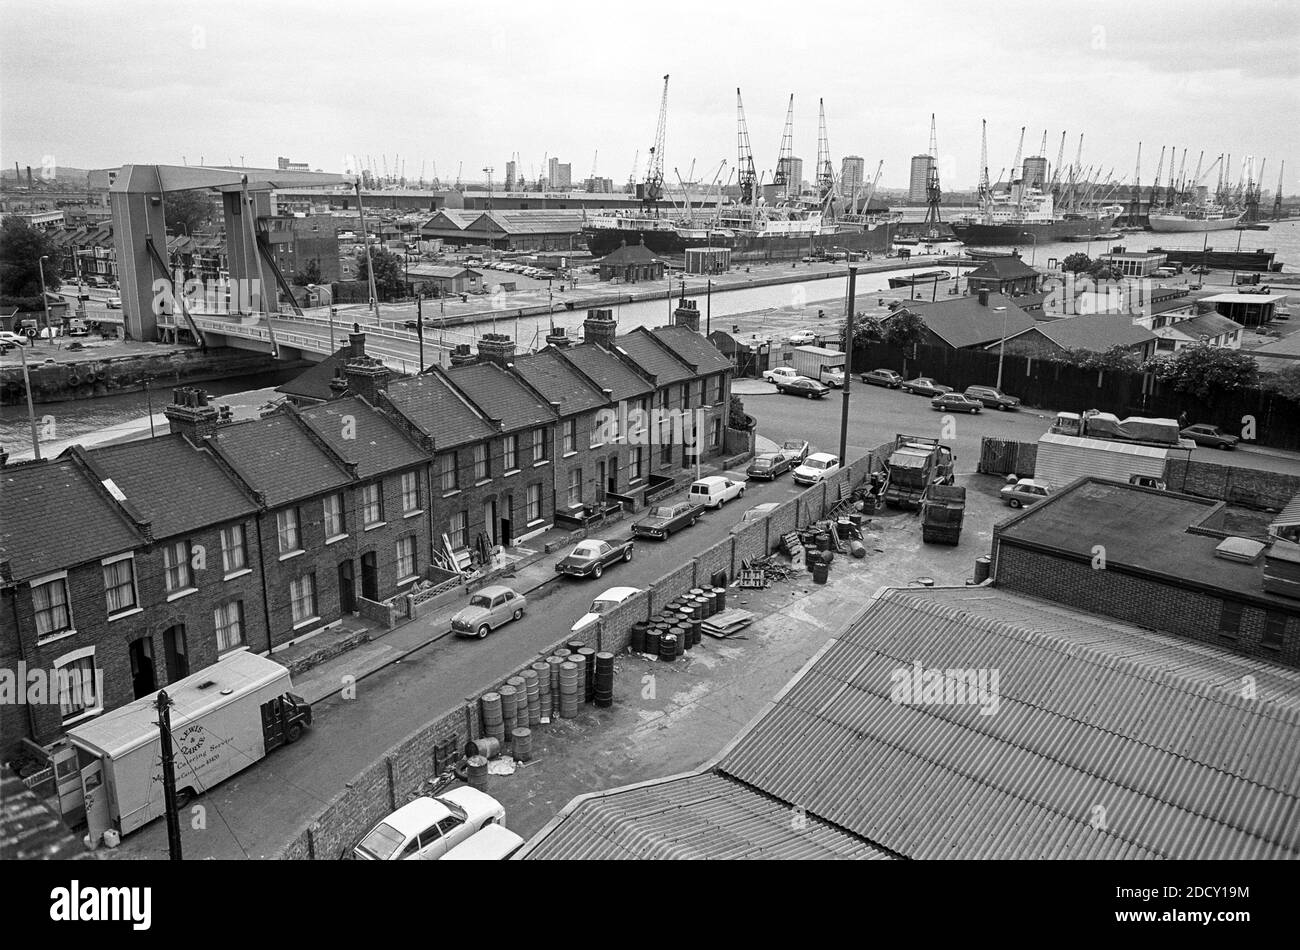 UK, London, Docklands, Isle of Dogs, Coldharbour, 1974. View to Main or south West India Dock over Preston's Rd from a disused warehouse on Coldharbour - near to The Gun pub. Terraced housing still exists, as does the Blue (lifting) Bridge. The warehouse is now demolished and new housing built on corner Horatio Place & Coldharbour. Stock Photo